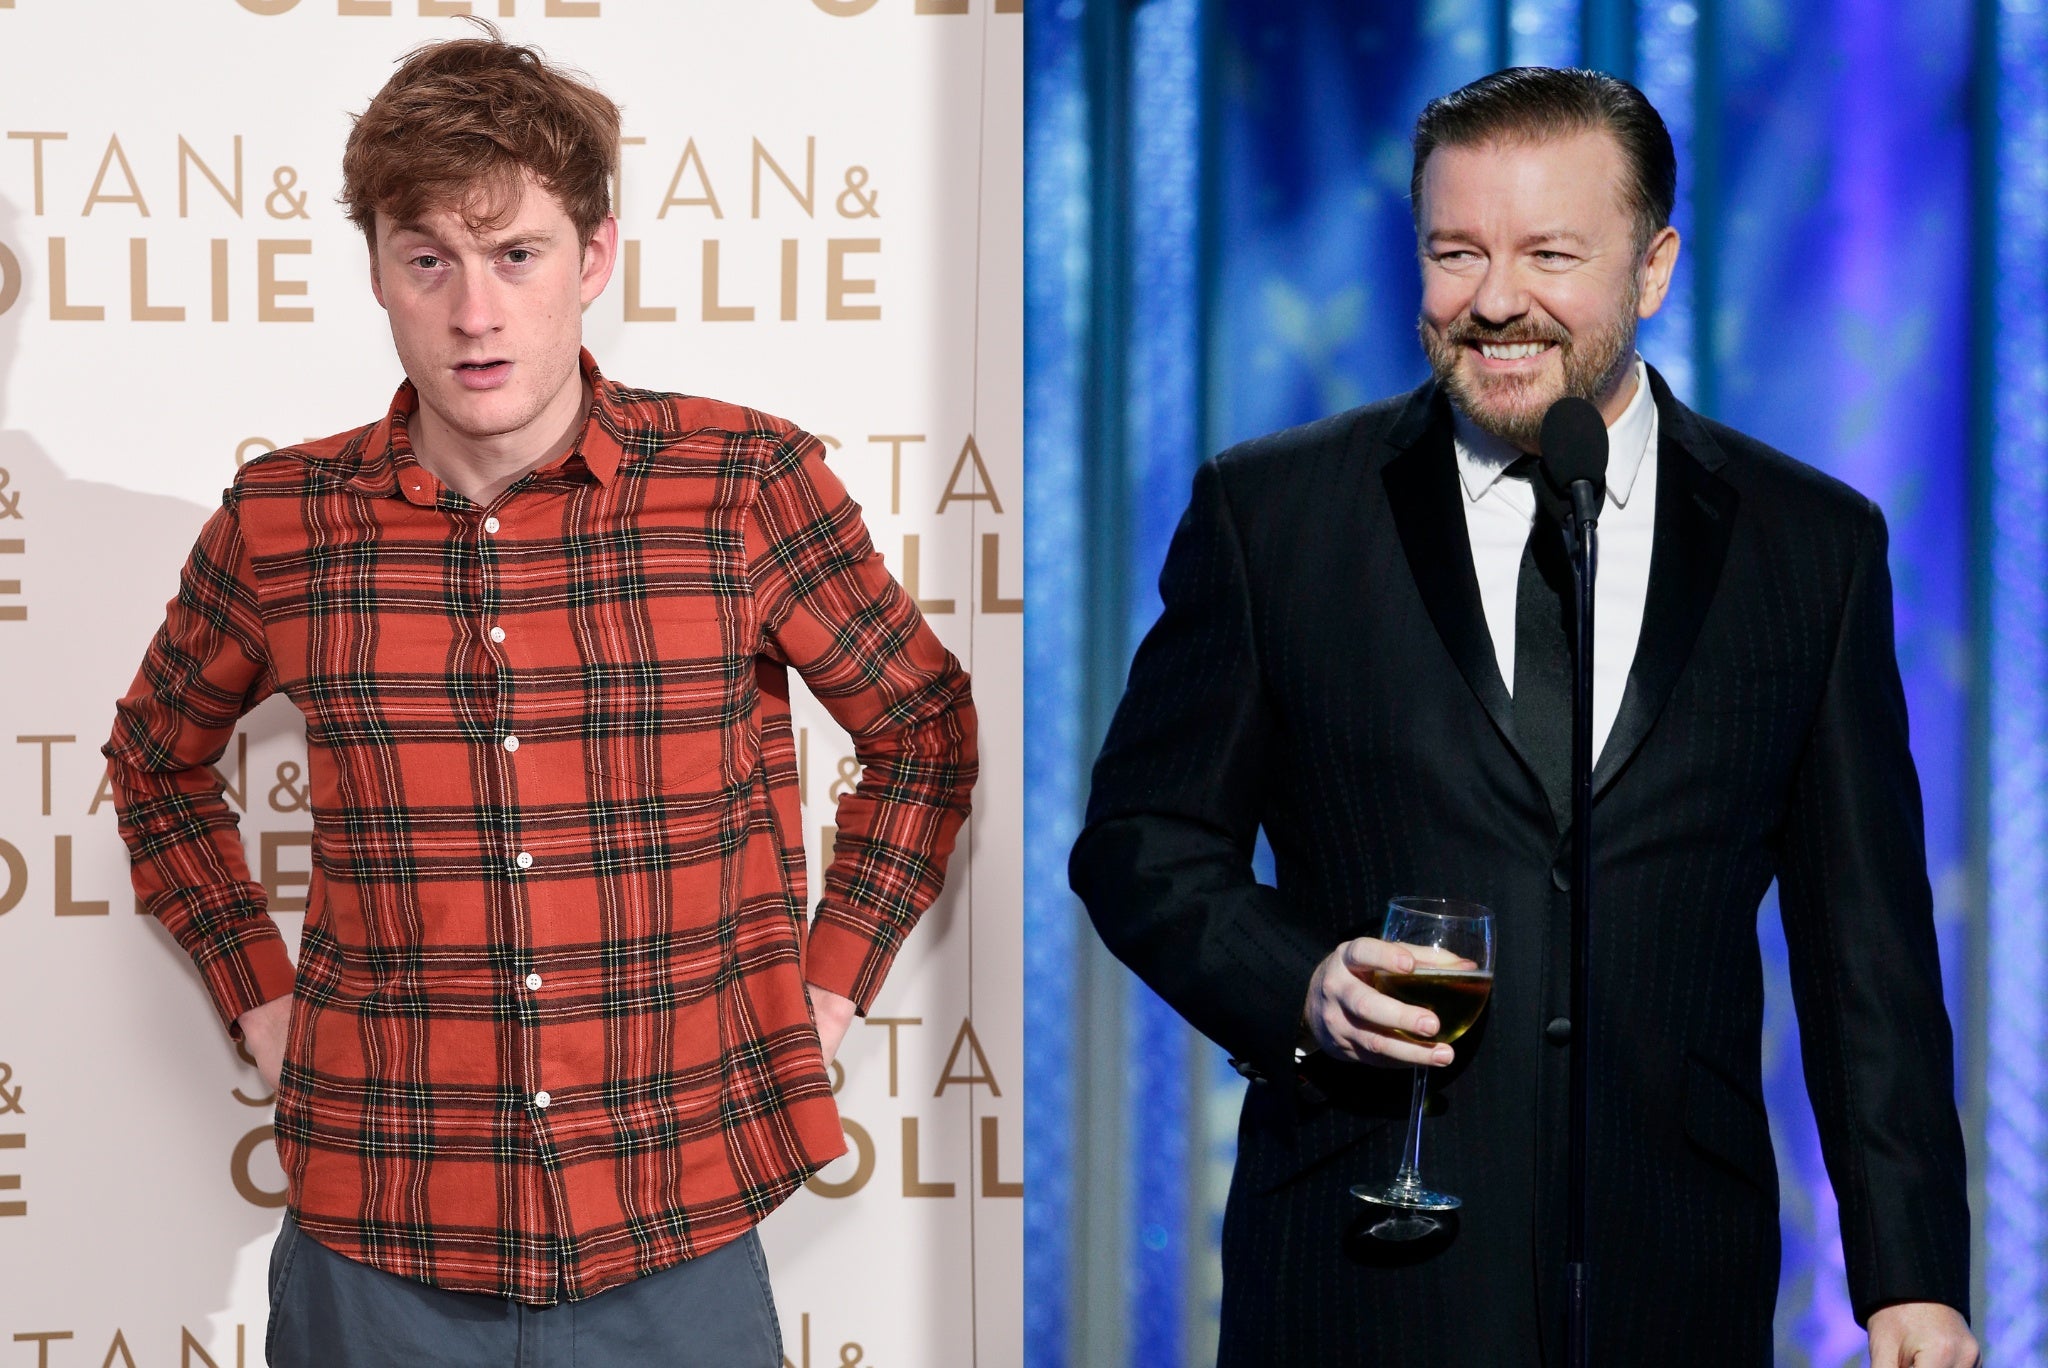 James Acaster took aim at Ricky Gervais in his 2019 standup show